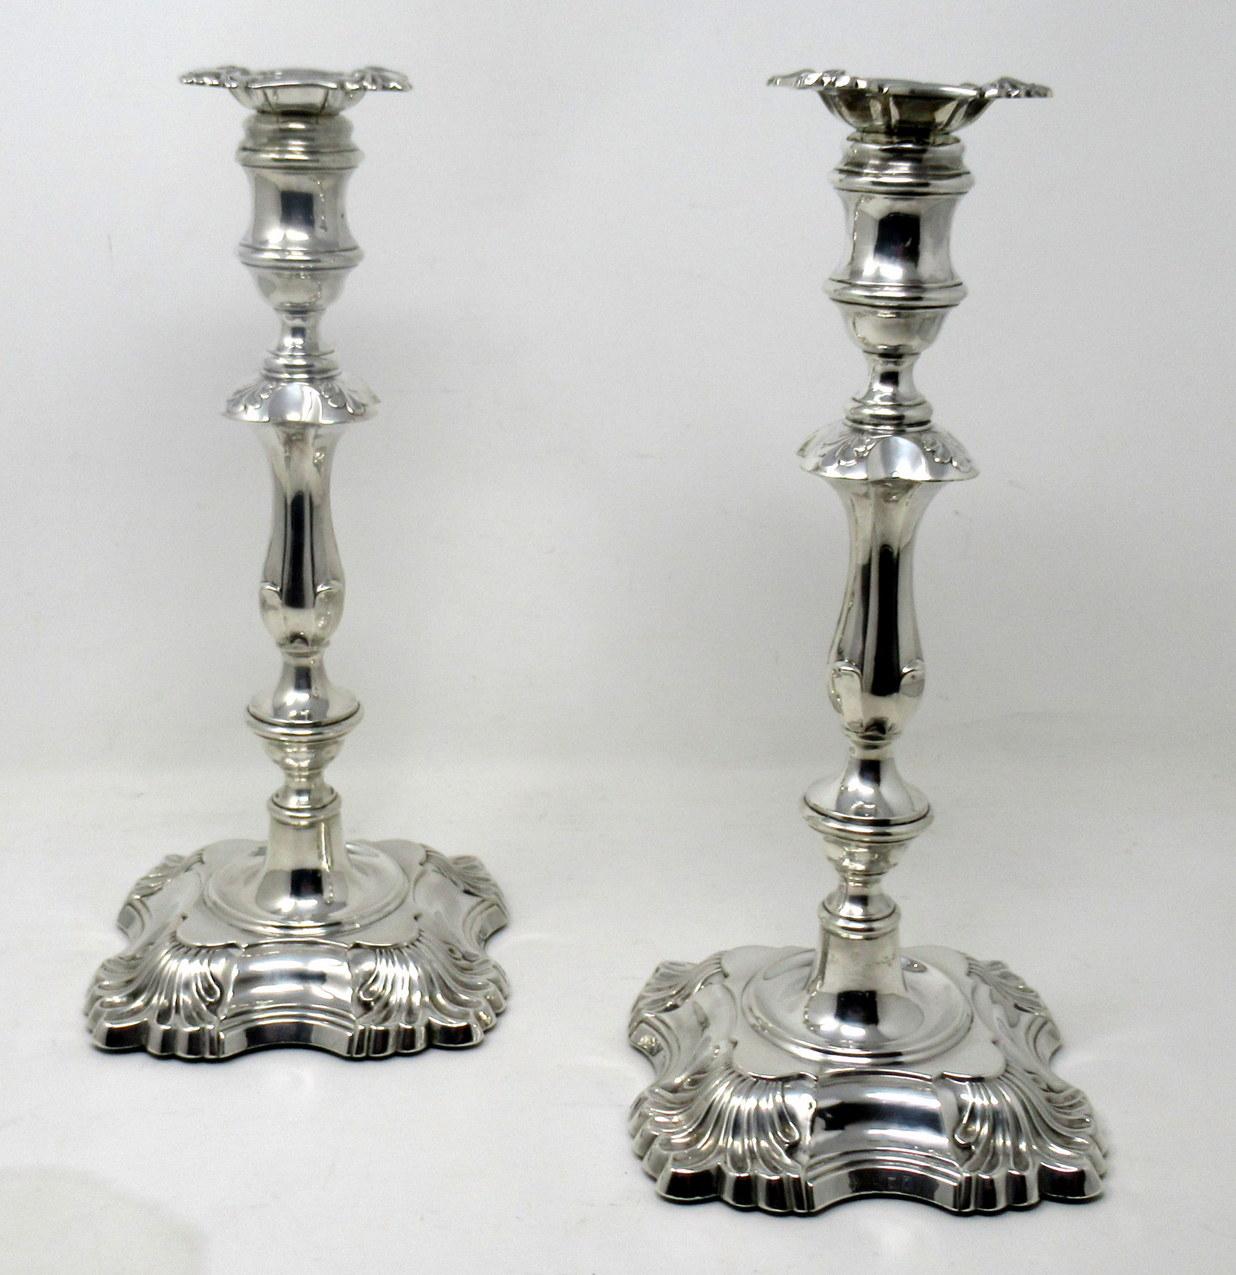 Stylish Pair of early Edwardian English heavy gauge Sterling silver single light table candlesticks of outstanding quality and seldom offered large proportions. 

Mark of William Hutton & Sons. Farringdon, London. London Hallmark for 1905.